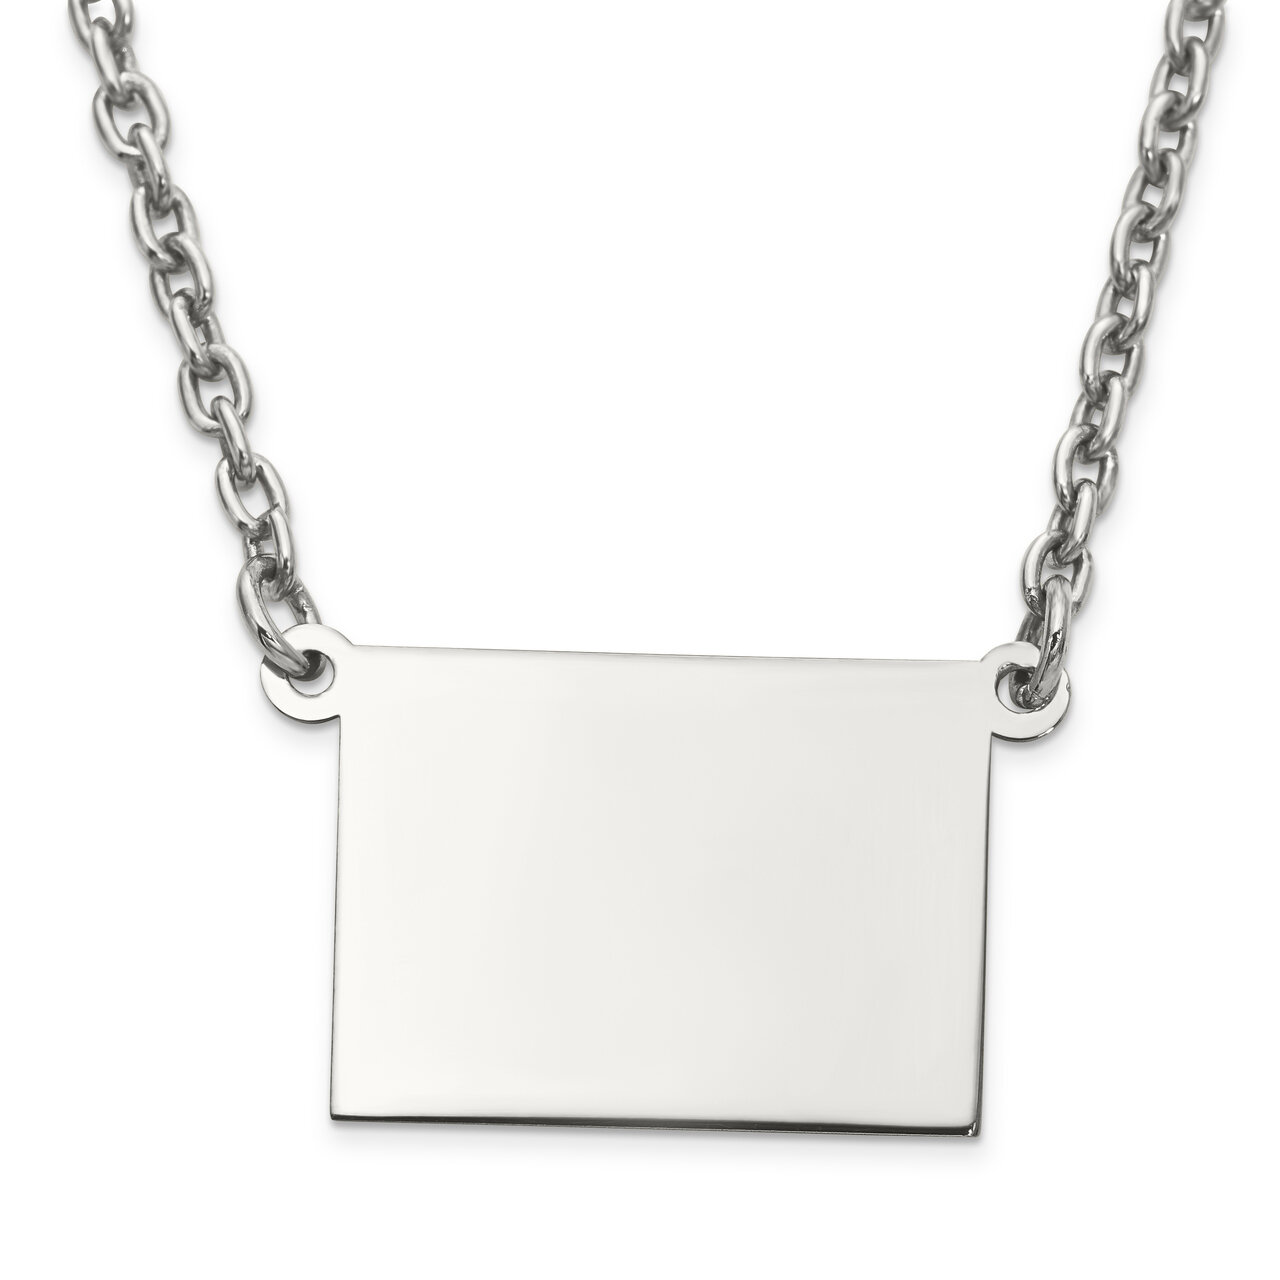 Colorado State Pendant Necklace with Chain 14k White Gold Engravable XNA706W-CO